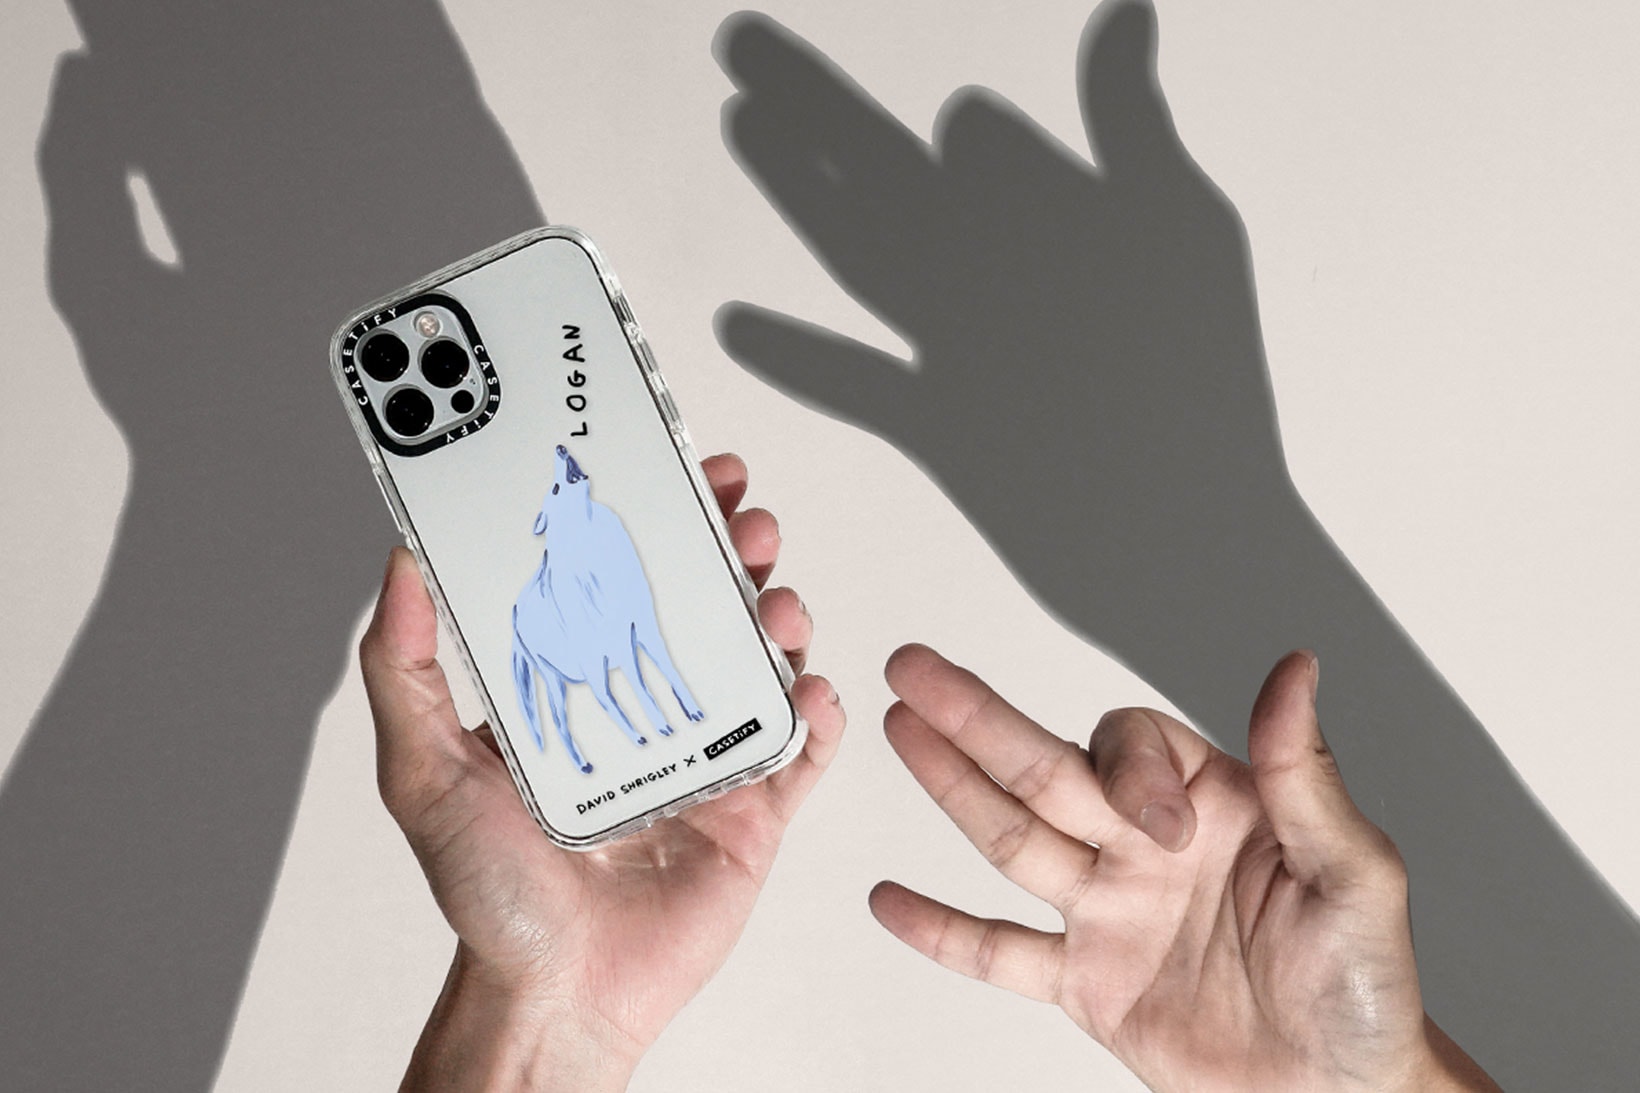 david shrigley casetify collaboration tech accessories wolf phone case hands